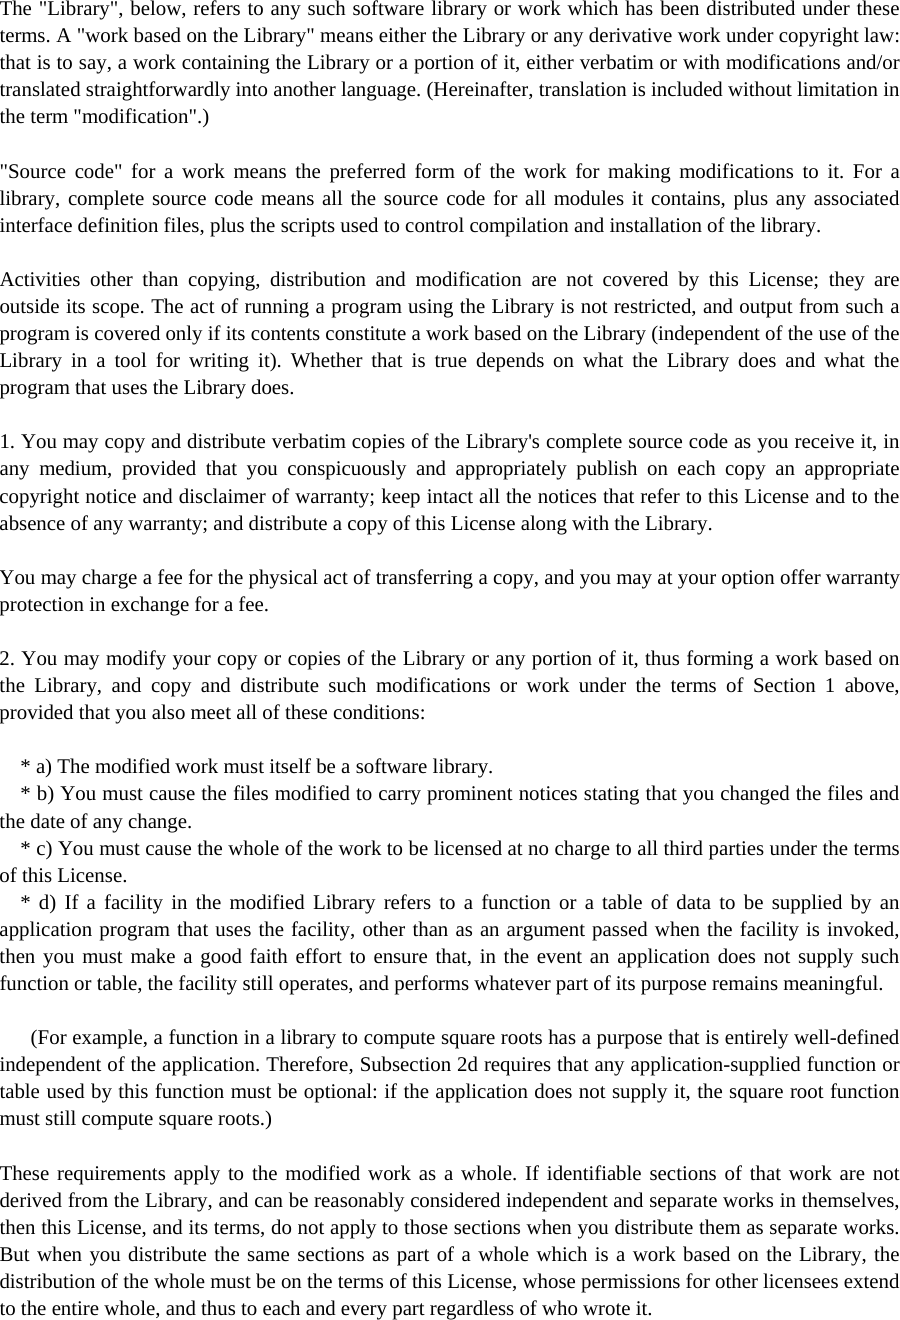 The &quot;Library&quot;, below, refers to any such software library or work which has been distributed under these terms. A &quot;work based on the Library&quot; means either the Library or any derivative work under copyright law: that is to say, a work containing the Library or a portion of it, either verbatim or with modifications and/or translated straightforwardly into another language. (Hereinafter, translation is included without limitation in the term &quot;modification&quot;.)  &quot;Source code&quot; for a work means the preferred form of the work for making modifications to it. For a library, complete source code means all the source code for all modules it contains, plus any associated interface definition files, plus the scripts used to control compilation and installation of the library.  Activities other than copying, distribution and modification are not covered by this License; they are outside its scope. The act of running a program using the Library is not restricted, and output from such a program is covered only if its contents constitute a work based on the Library (independent of the use of the Library in a tool for writing it). Whether that is true depends on what the Library does and what the program that uses the Library does.  1. You may copy and distribute verbatim copies of the Library&apos;s complete source code as you receive it, in any medium, provided that you conspicuously and appropriately publish on each copy an appropriate copyright notice and disclaimer of warranty; keep intact all the notices that refer to this License and to the absence of any warranty; and distribute a copy of this License along with the Library.  You may charge a fee for the physical act of transferring a copy, and you may at your option offer warranty protection in exchange for a fee.  2. You may modify your copy or copies of the Library or any portion of it, thus forming a work based on the Library, and copy and distribute such modifications or work under the terms of Section 1 above, provided that you also meet all of these conditions:      * a) The modified work must itself be a software library.     * b) You must cause the files modified to carry prominent notices stating that you changed the files and the date of any change.     * c) You must cause the whole of the work to be licensed at no charge to all third parties under the terms of this License.     * d) If a facility in the modified Library refers to a function or a table of data to be supplied by an application program that uses the facility, other than as an argument passed when the facility is invoked, then you must make a good faith effort to ensure that, in the event an application does not supply such function or table, the facility still operates, and performs whatever part of its purpose remains meaningful.        (For example, a function in a library to compute square roots has a purpose that is entirely well-defined independent of the application. Therefore, Subsection 2d requires that any application-supplied function or table used by this function must be optional: if the application does not supply it, the square root function must still compute square roots.)  These requirements apply to the modified work as a whole. If identifiable sections of that work are not derived from the Library, and can be reasonably considered independent and separate works in themselves, then this License, and its terms, do not apply to those sections when you distribute them as separate works. But when you distribute the same sections as part of a whole which is a work based on the Library, the distribution of the whole must be on the terms of this License, whose permissions for other licensees extend to the entire whole, and thus to each and every part regardless of who wrote it. 